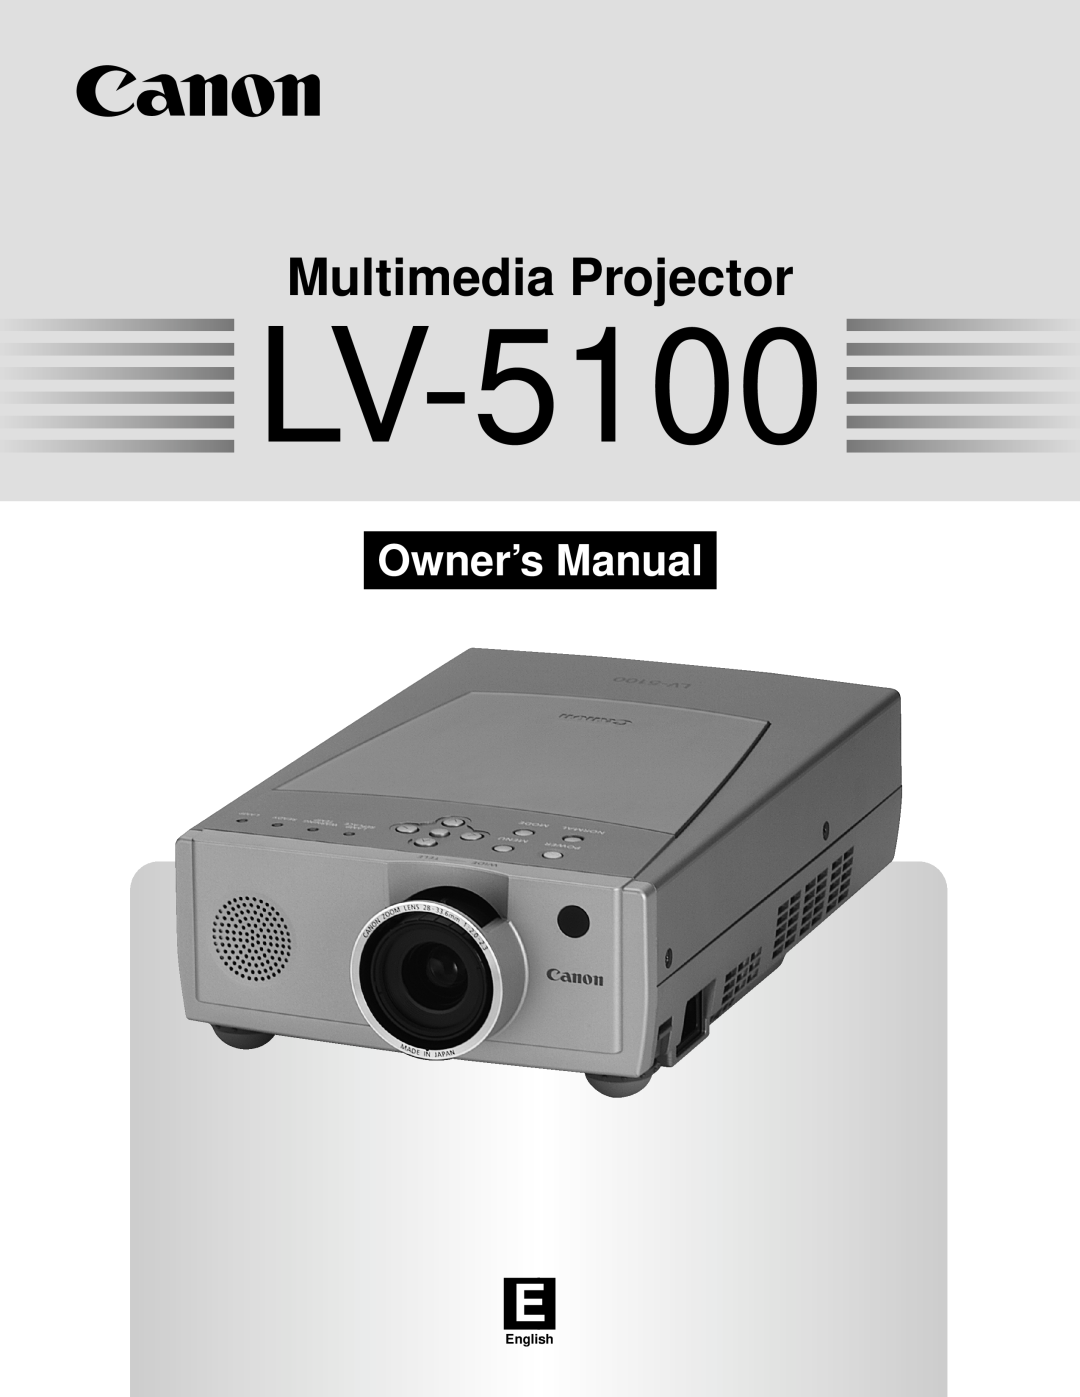 Canon owner manual LV-5100, Multimedia Projector, English 